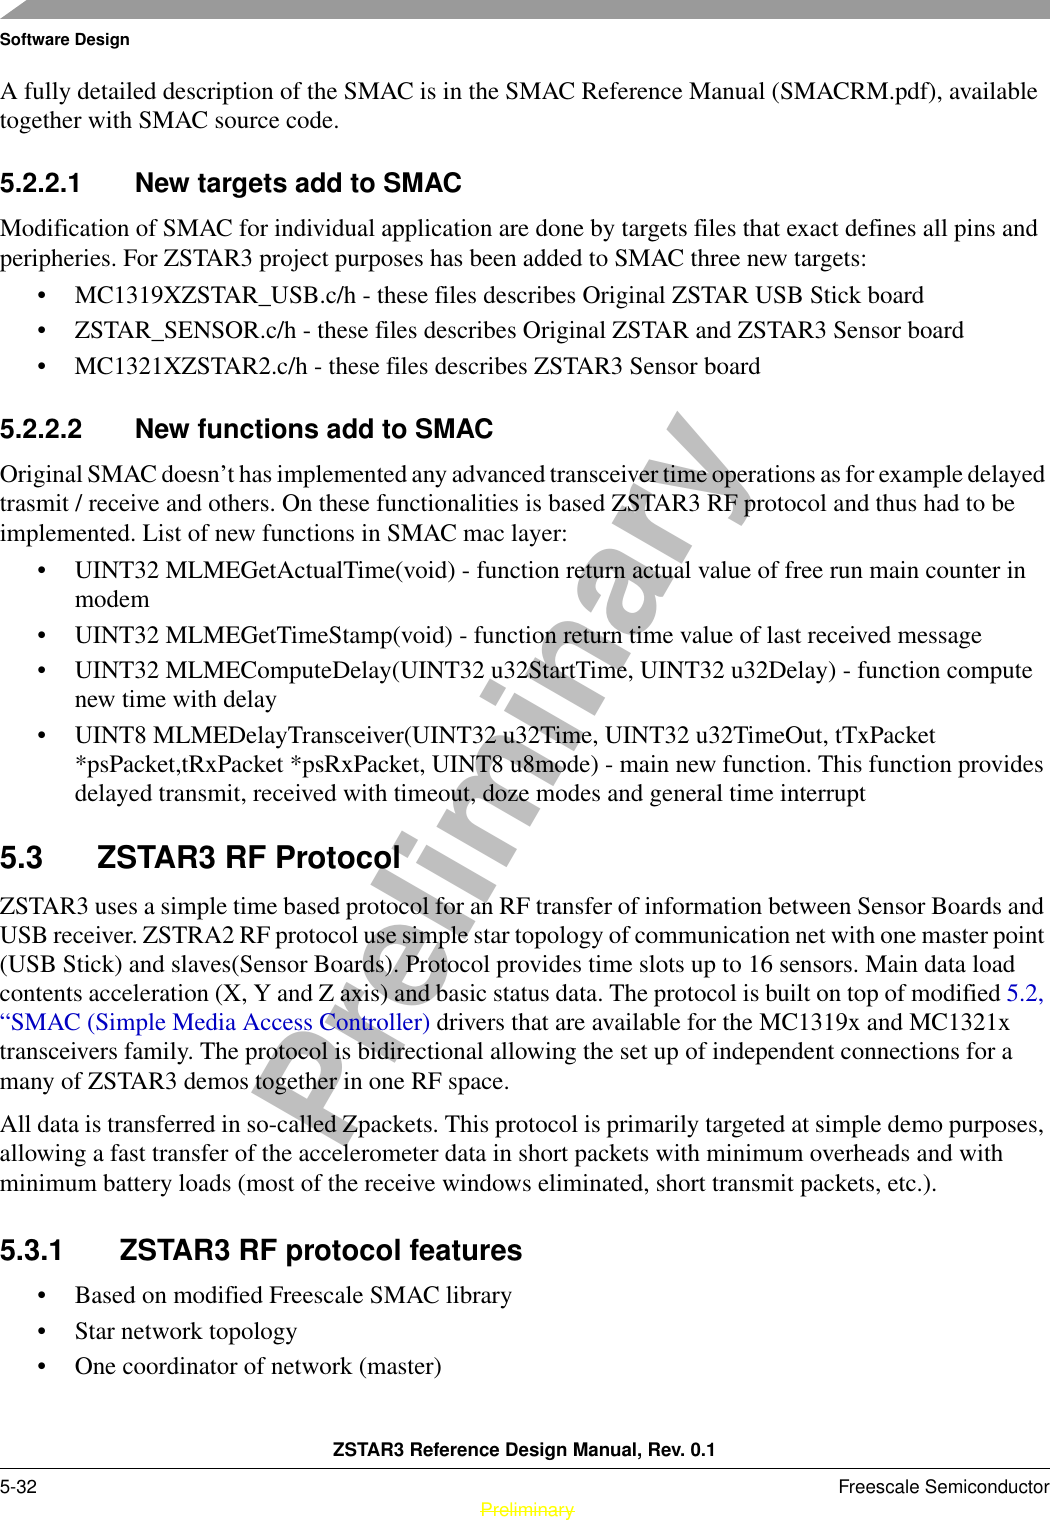 Software DesignZSTAR3 Reference Design Manual, Rev. 0.15-32 Freescale Semiconductor PreliminaryPreliminaryA fully detailed description of the SMAC is in the SMAC Reference Manual (SMACRM.pdf), available together with SMAC source code.5.2.2.1 New targets add to SMACModification of SMAC for individual application are done by targets files that exact defines all pins and peripheries. For ZSTAR3 project purposes has been added to SMAC three new targets:• MC1319XZSTAR_USB.c/h - these files describes Original ZSTAR USB Stick board• ZSTAR_SENSOR.c/h - these files describes Original ZSTAR and ZSTAR3 Sensor board• MC1321XZSTAR2.c/h - these files describes ZSTAR3 Sensor board5.2.2.2 New functions add to SMACOriginal SMAC doesn’t has implemented any advanced transceiver time operations as for example delayed trasmit / receive and others. On these functionalities is based ZSTAR3 RF protocol and thus had to be implemented. List of new functions in SMAC mac layer:• UINT32 MLMEGetActualTime(void) - function return actual value of free run main counter in modem• UINT32 MLMEGetTimeStamp(void) - function return time value of last received message• UINT32 MLMEComputeDelay(UINT32 u32StartTime, UINT32 u32Delay) - function compute new time with delay• UINT8 MLMEDelayTransceiver(UINT32 u32Time, UINT32 u32TimeOut, tTxPacket *psPacket,tRxPacket *psRxPacket, UINT8 u8mode) - main new function. This function provides delayed transmit, received with timeout, doze modes and general time interrupt5.3 ZSTAR3 RF ProtocolZSTAR3 uses a simple time based protocol for an RF transfer of information between Sensor Boards and USB receiver. ZSTRA2 RF protocol use simple star topology of communication net with one master point (USB Stick) and slaves(Sensor Boards). Protocol provides time slots up to 16 sensors. Main data load contents acceleration (X, Y and Z axis) and basic status data. The protocol is built on top of modified 5.2, “SMAC (Simple Media Access Controller) drivers that are available for the MC1319x and MC1321x transceivers family. The protocol is bidirectional allowing the set up of independent connections for a many of ZSTAR3 demos together in one RF space.All data is transferred in so-called Zpackets. This protocol is primarily targeted at simple demo purposes, allowing a fast transfer of the accelerometer data in short packets with minimum overheads and with minimum battery loads (most of the receive windows eliminated, short transmit packets, etc.).5.3.1 ZSTAR3 RF protocol features• Based on modified Freescale SMAC library• Star network topology• One coordinator of network (master)